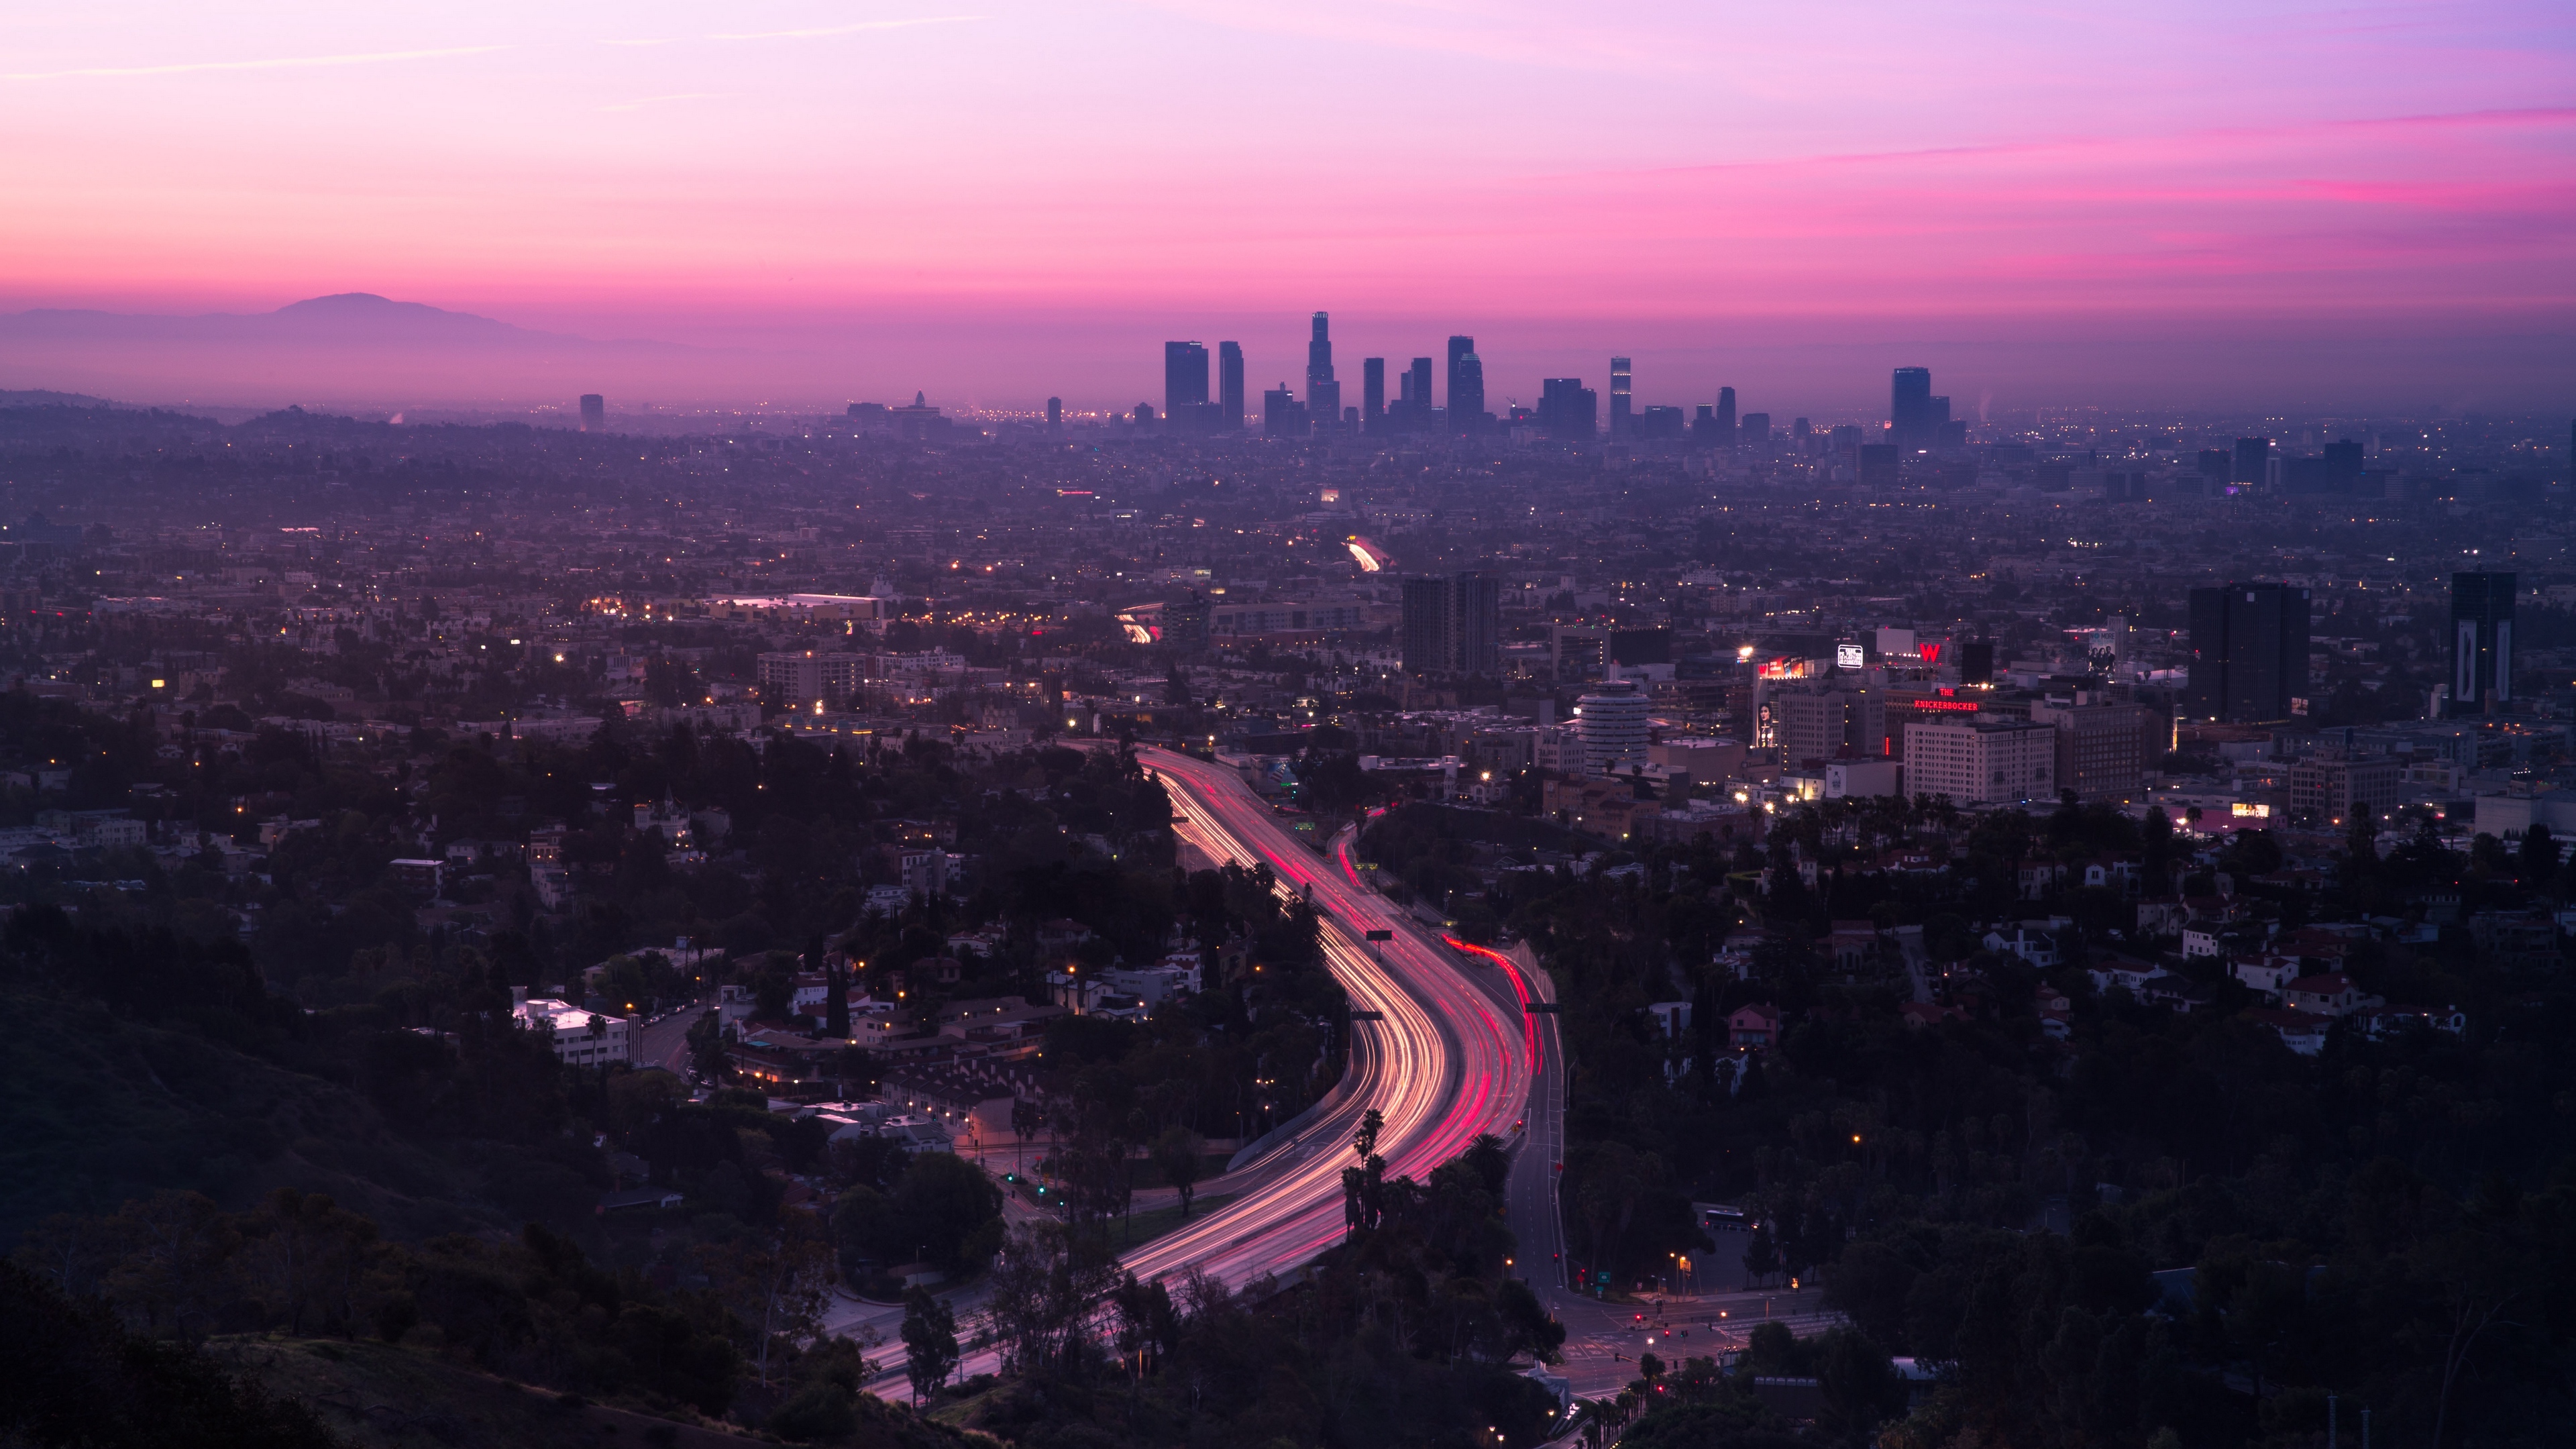 Wallpaper City, Aerial View, Road, Sunset, Los Angeles, - Los Angeles - HD Wallpaper 